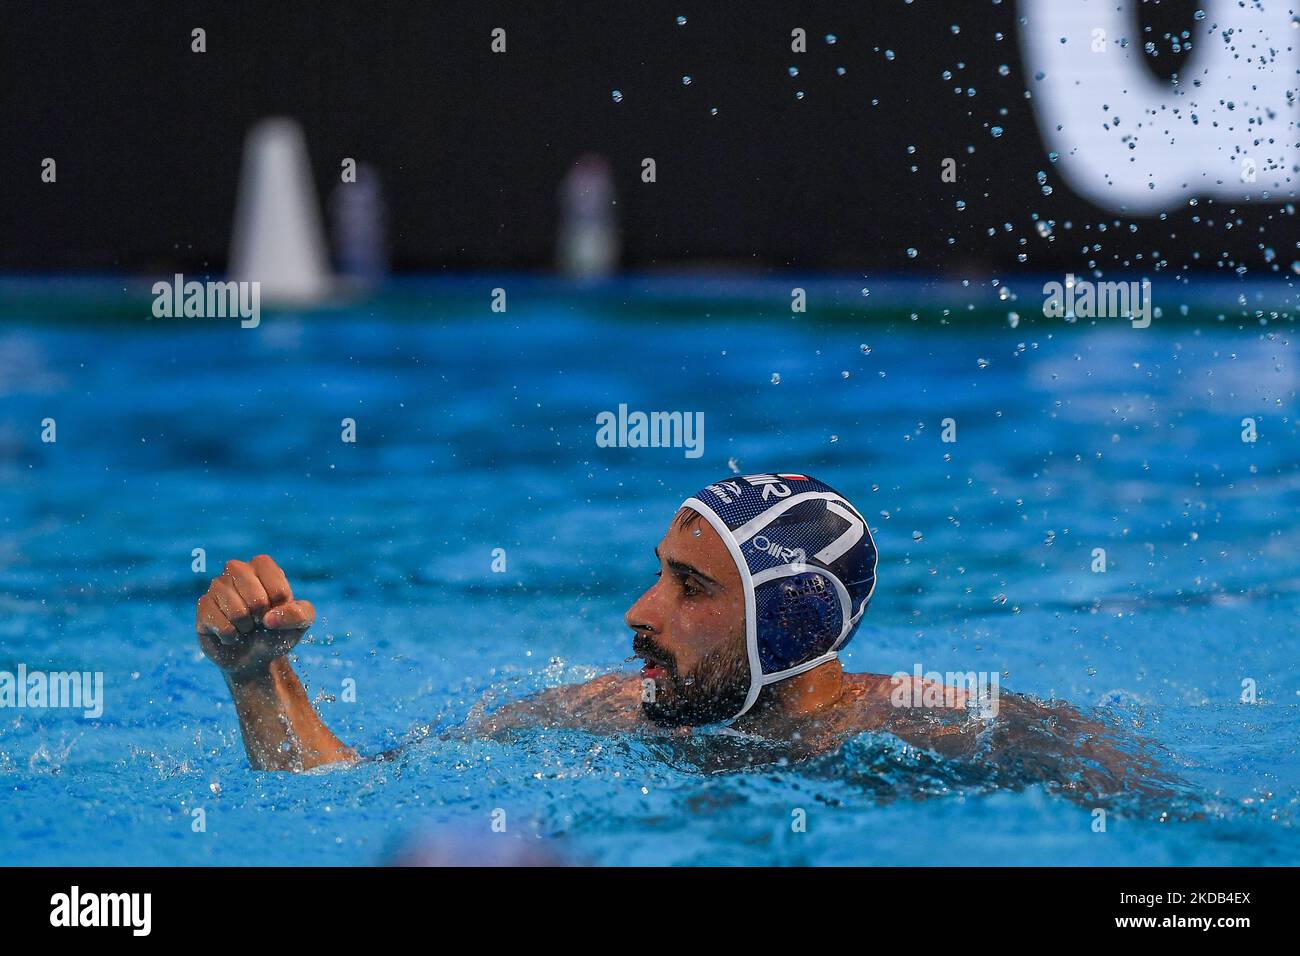 Vincenzo Renzuto Iodice (AN Brescia) celebrates after scoring a goal during the Waterpolo Italian Serie A match Final 1st / 2nd place - race 3 - Pro Recco vs AN Brescia on May 28, 2022 at the Sant'Anna in Recco, Italy (Photo by Danilo Vigo/LiveMedia/NurPhoto) Stock Photo